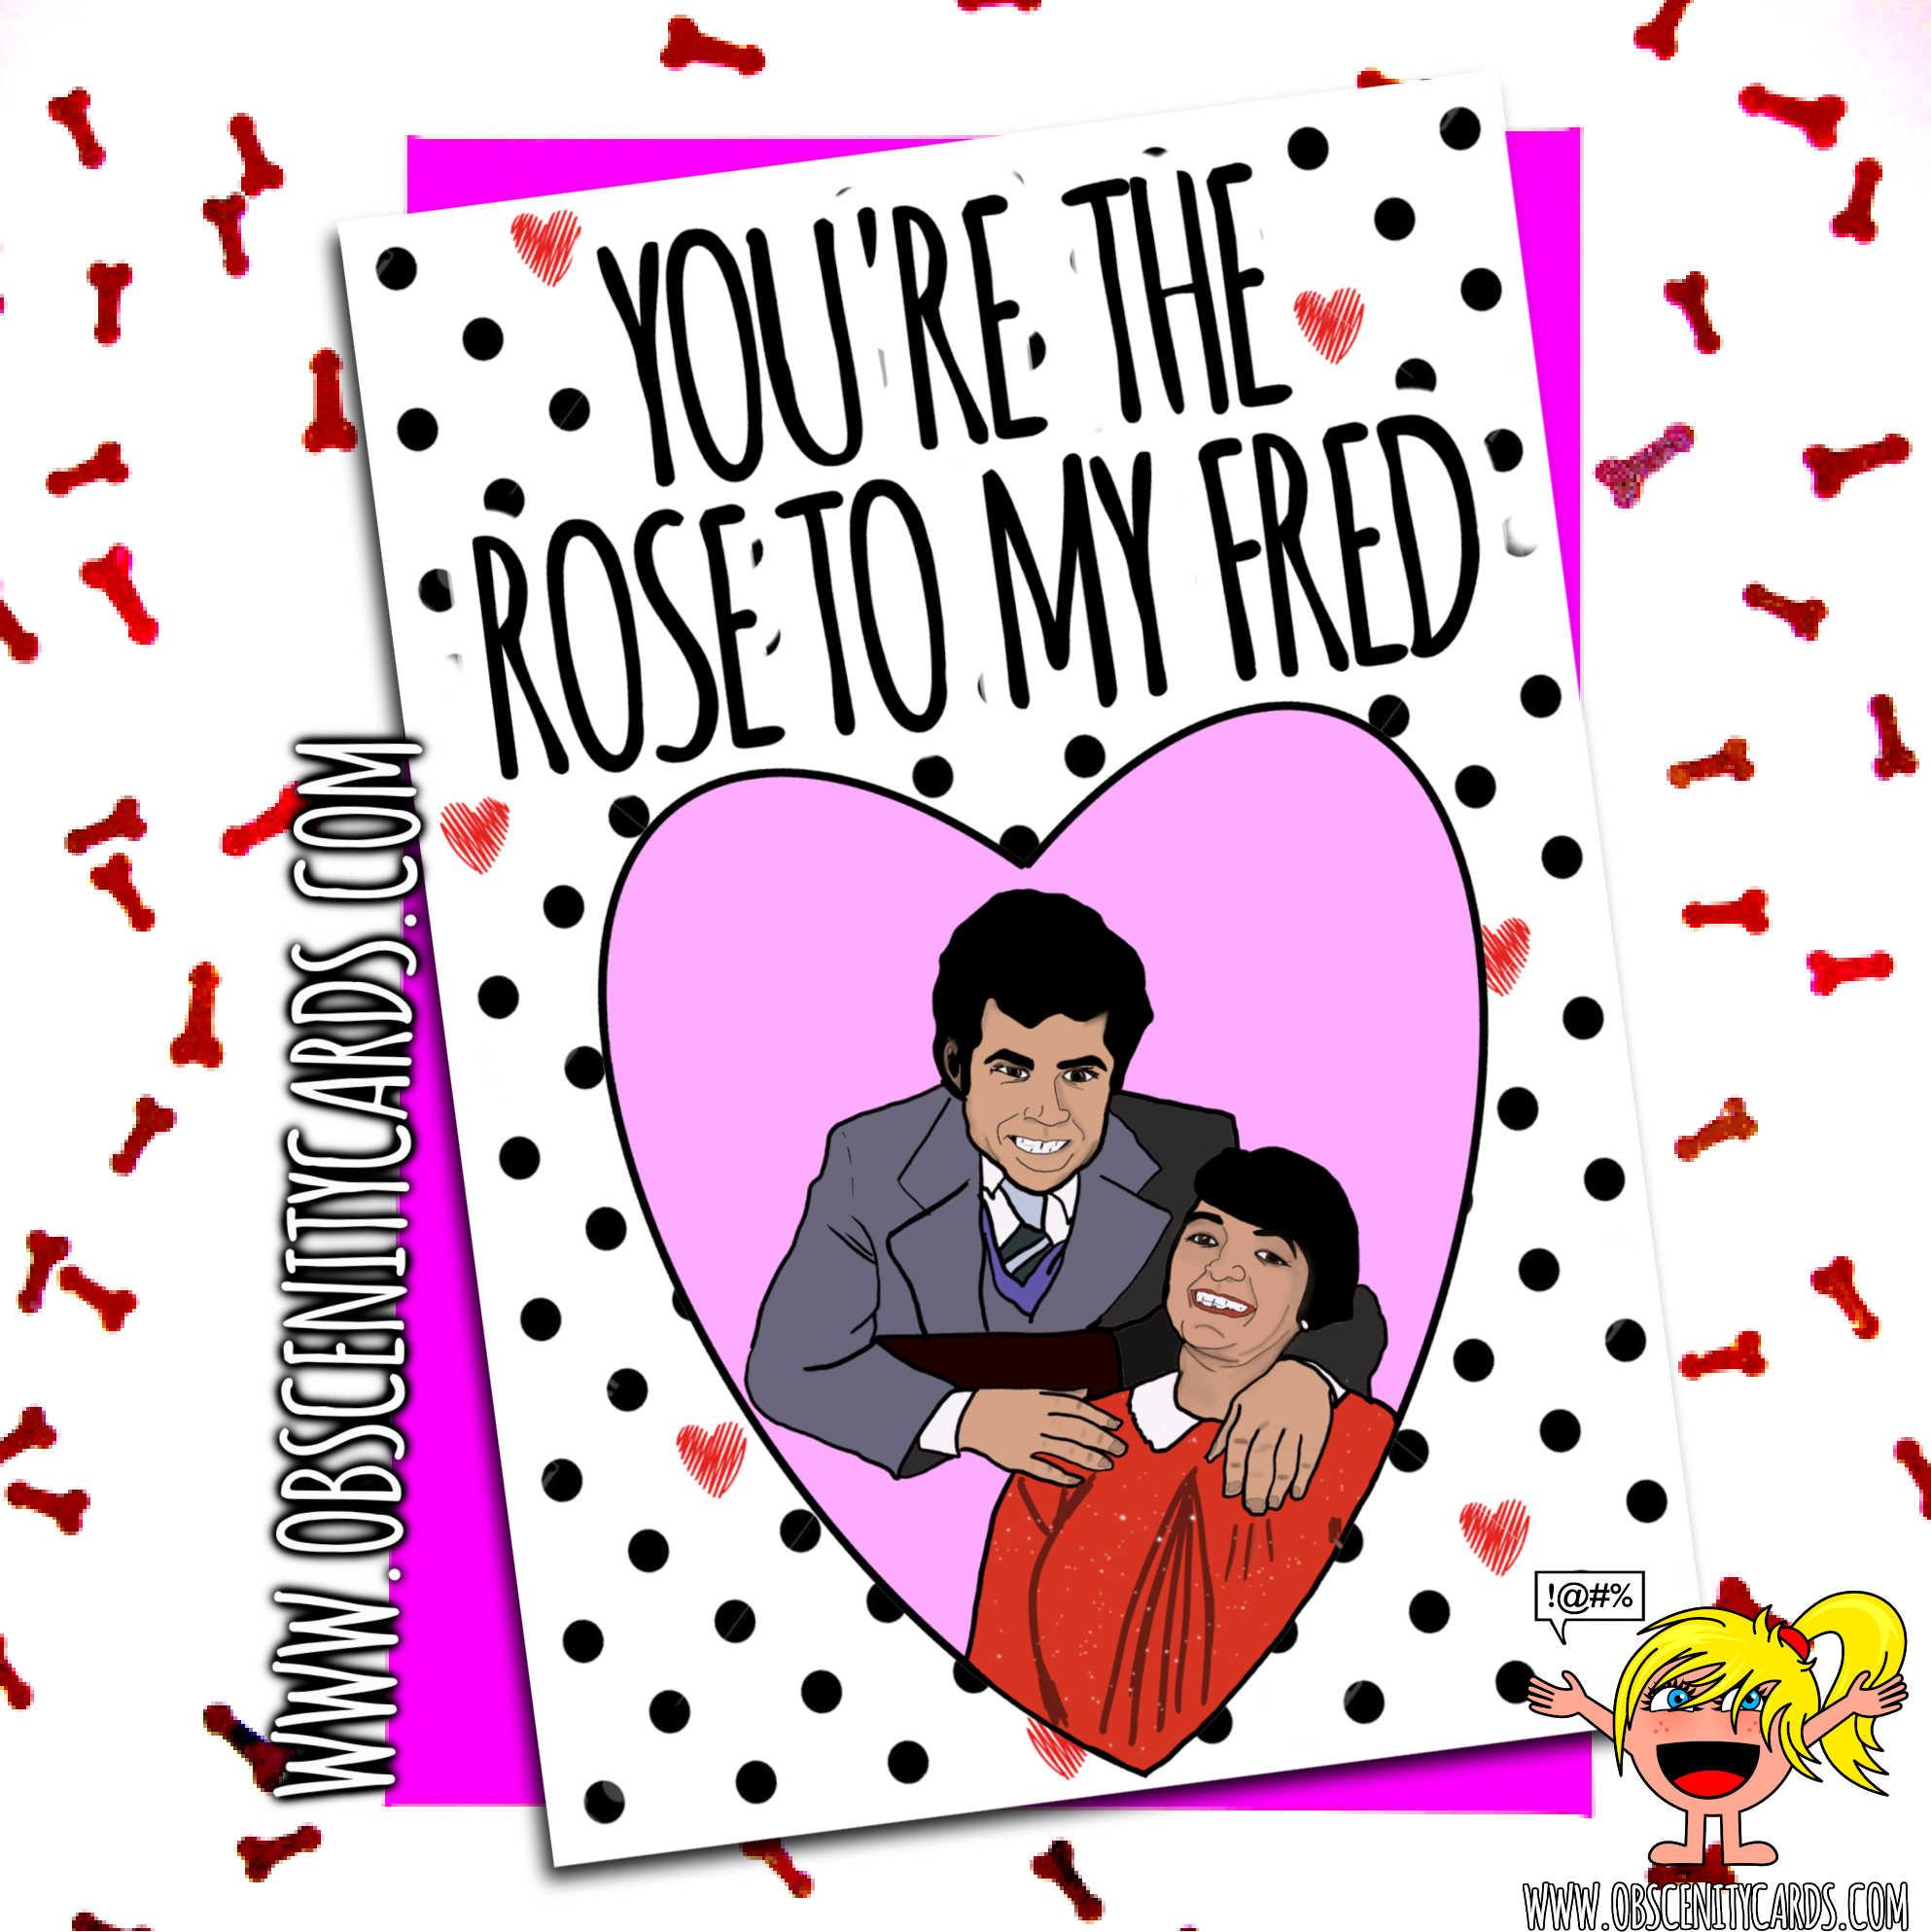 YOU'RE THE ROSE TO MY FRED FUNNY VALENTINES ANNIVERSARY CARD